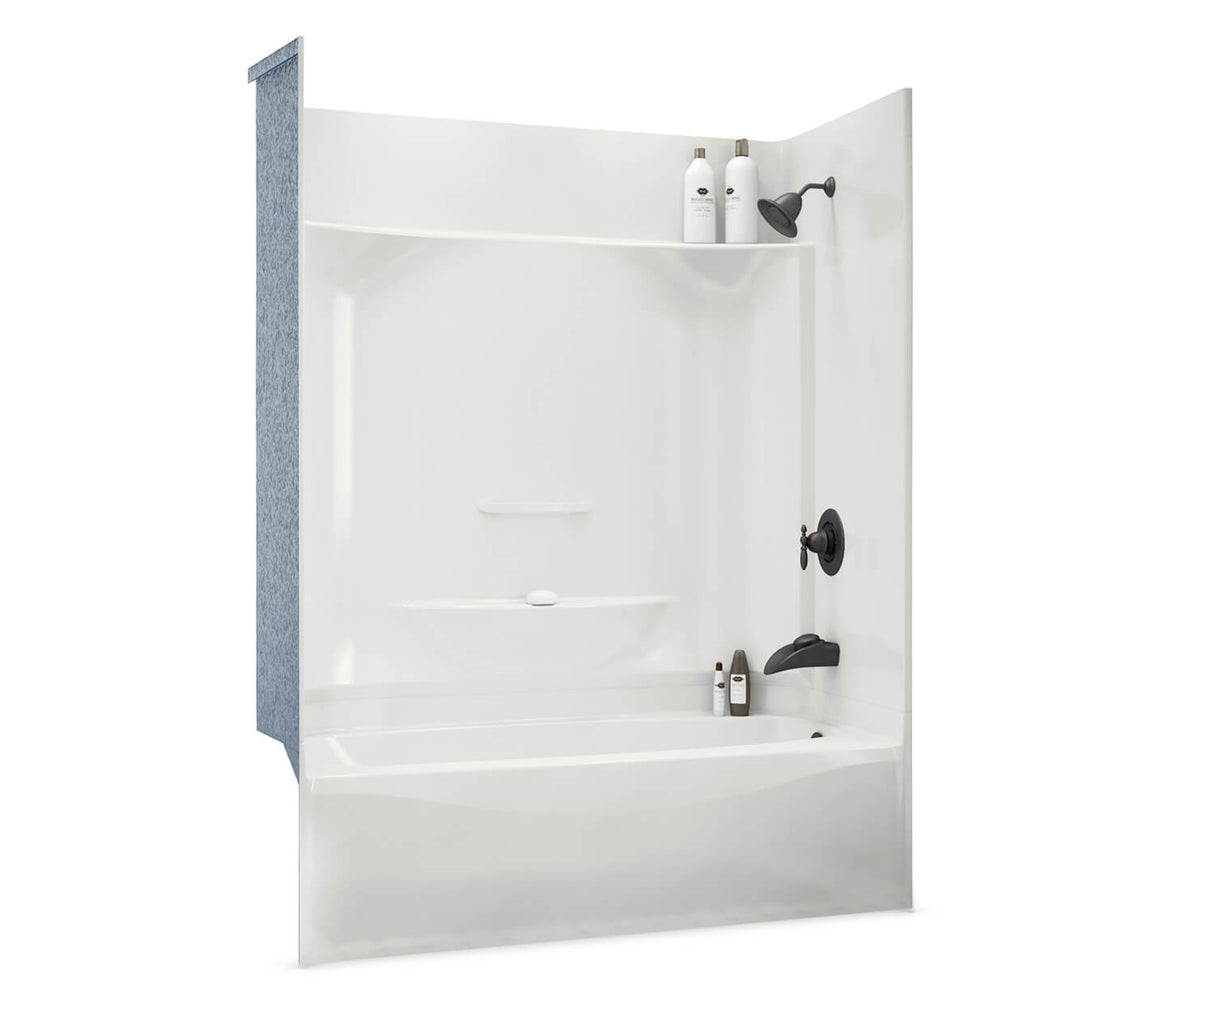 Aker KDTS 3260 AcrylX Alcove Left-Hand Drain Four-Piece Tub Shower in Sterling Silver